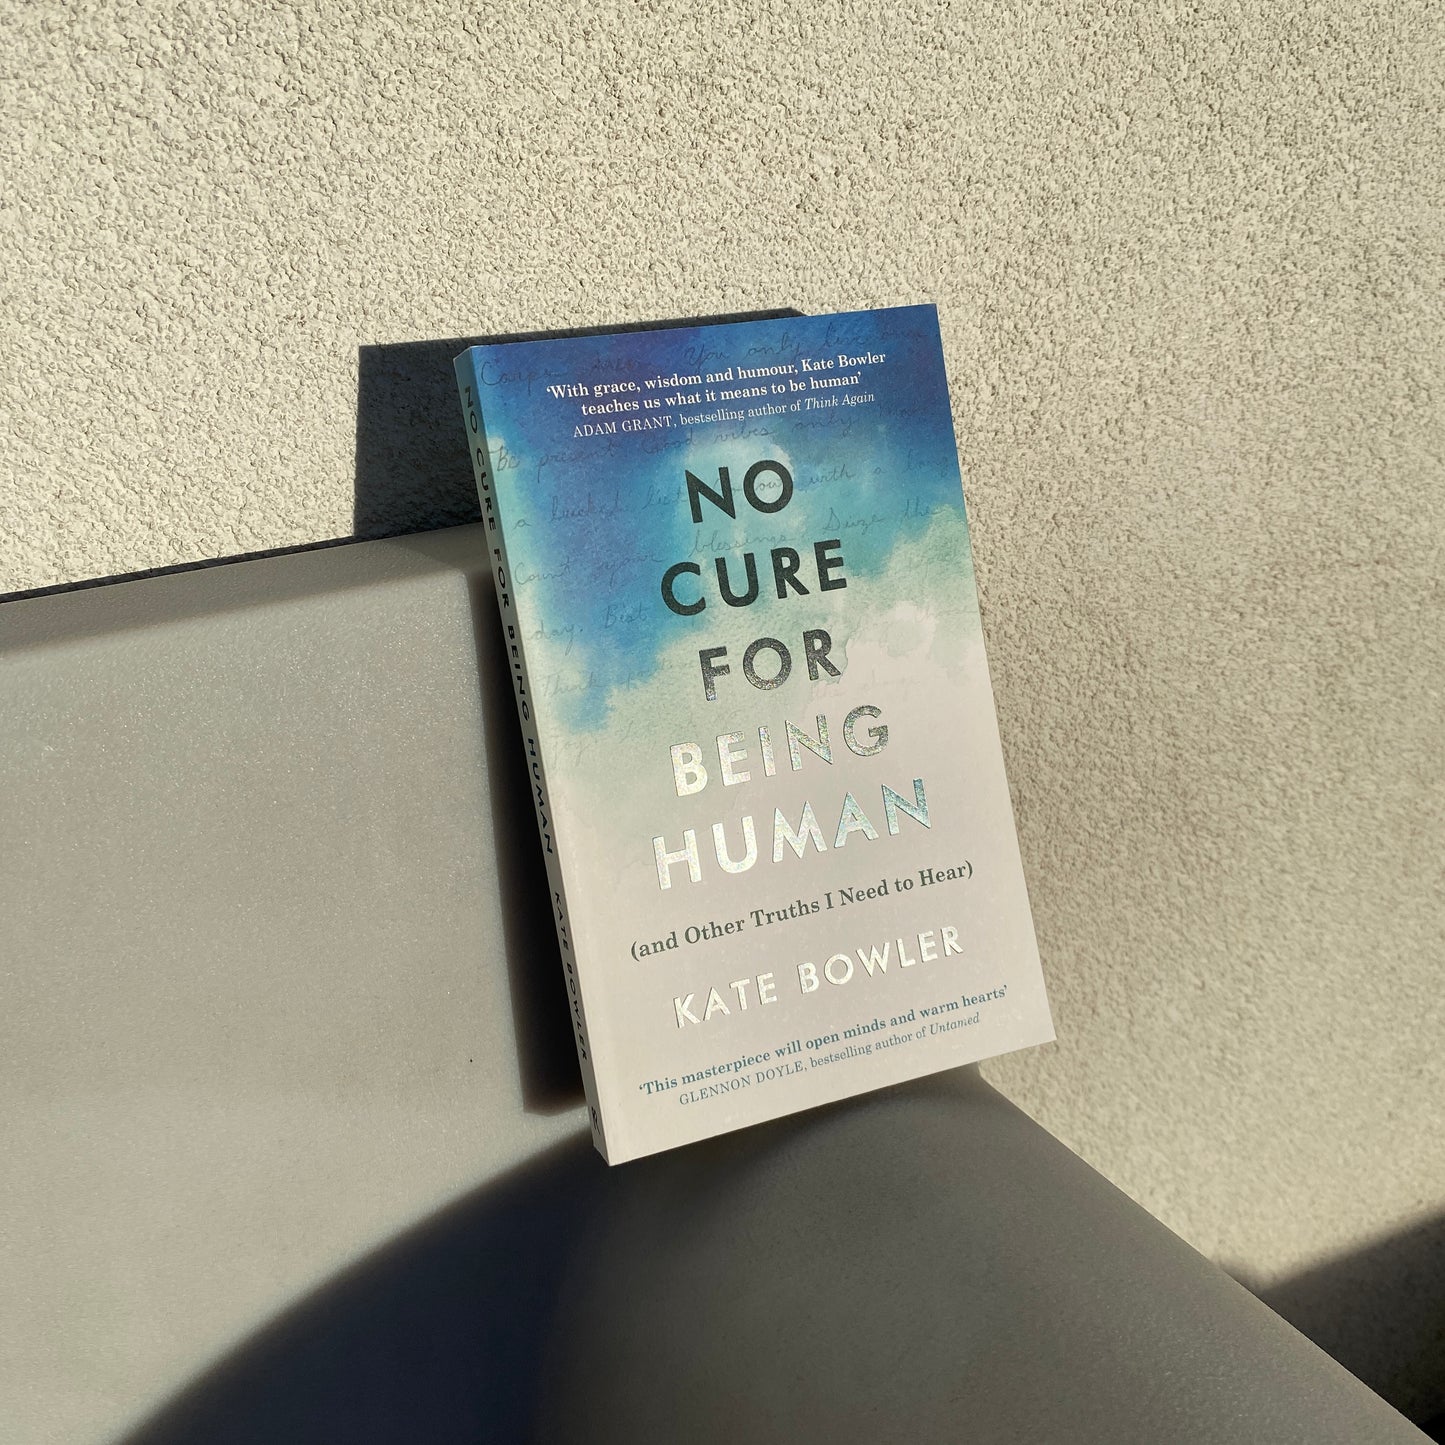 No Cure for Being Human (and Other Truths I Need to Hear)